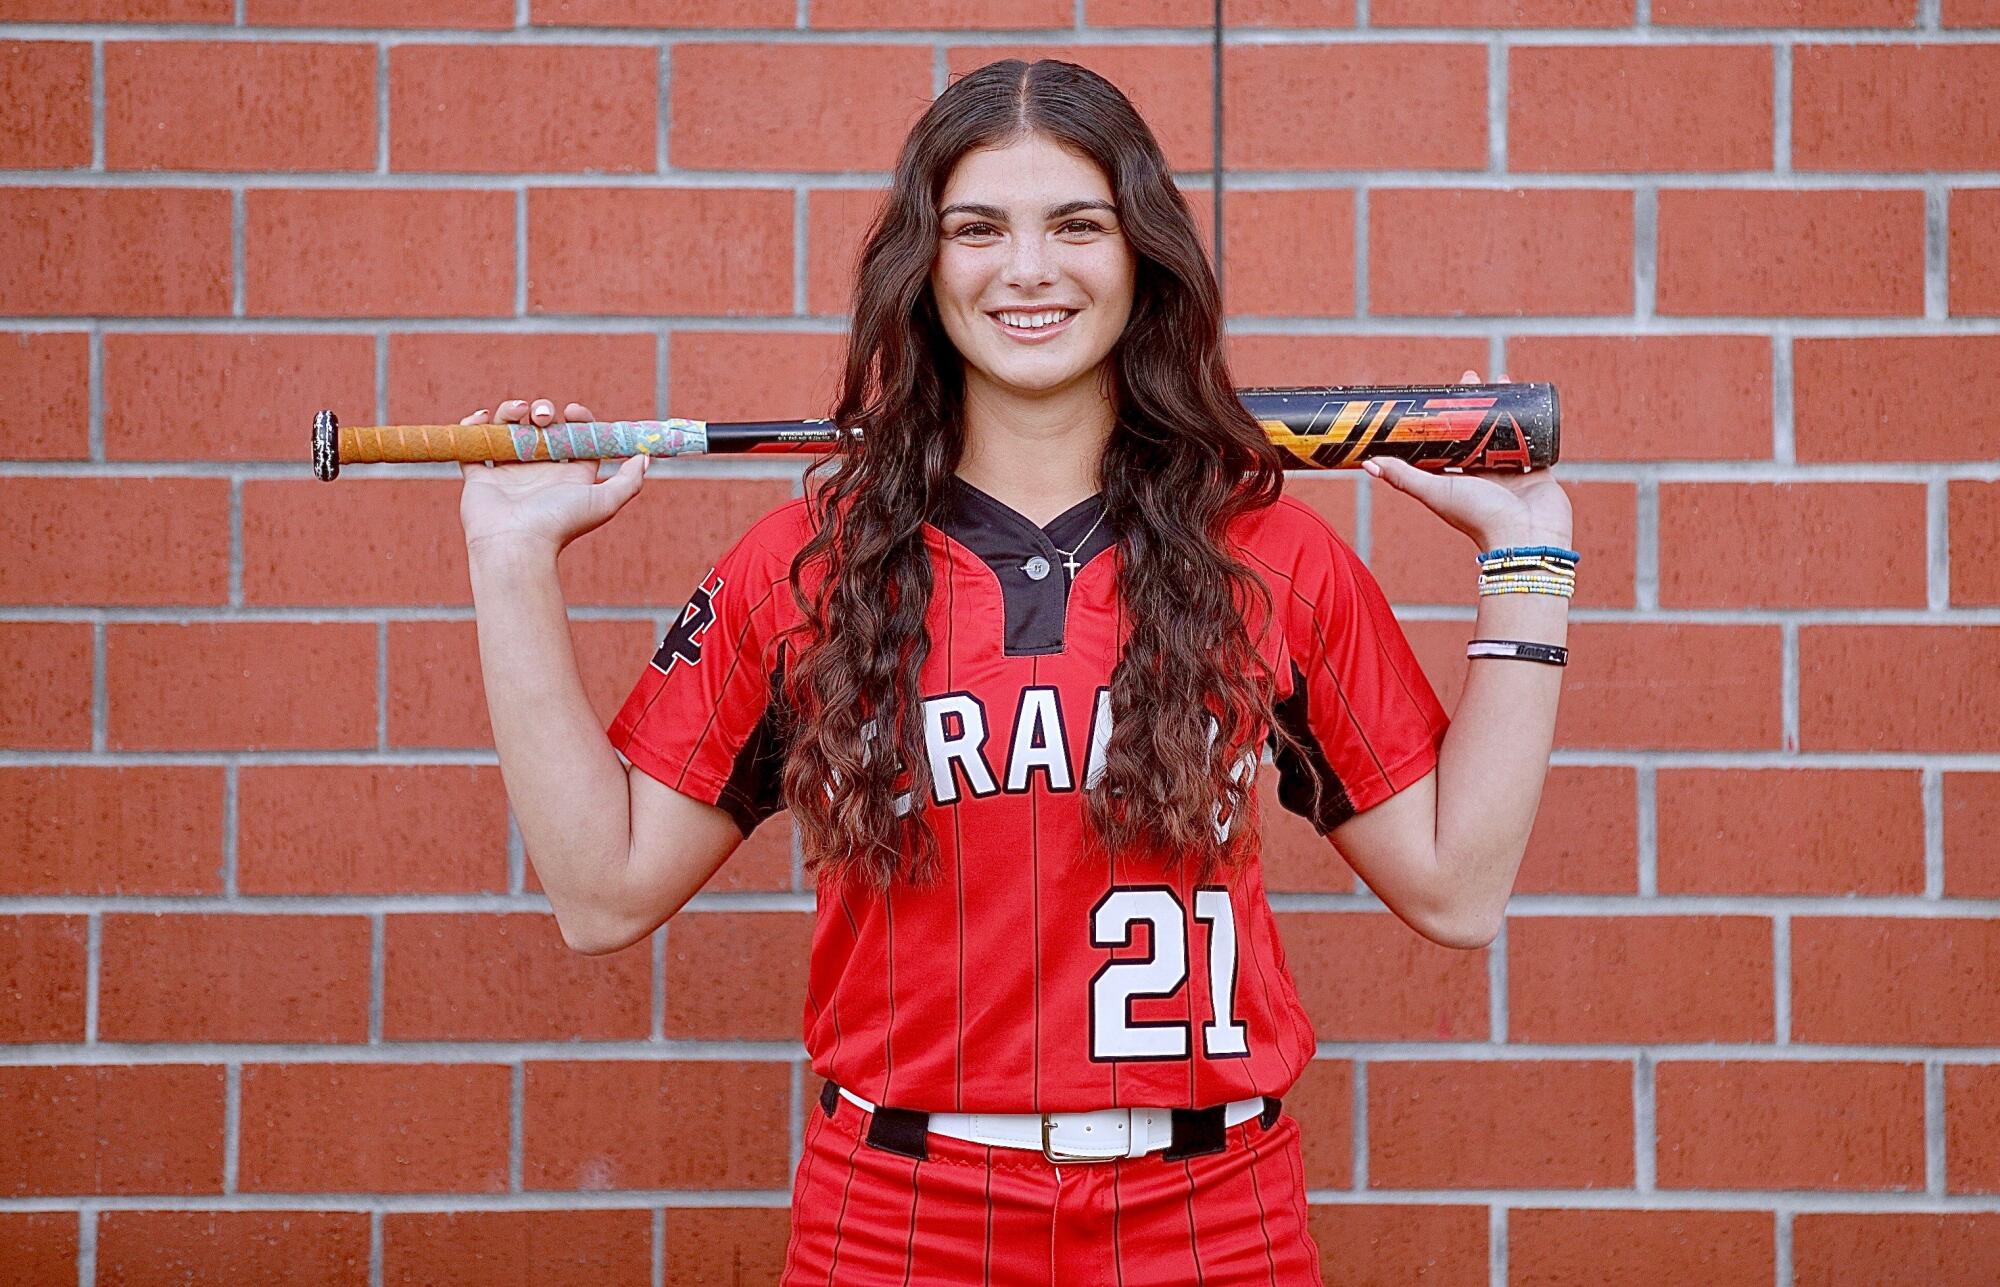 Aleena Garcia is hoping her senior season is the one she finally wins a Southern Section softball title.